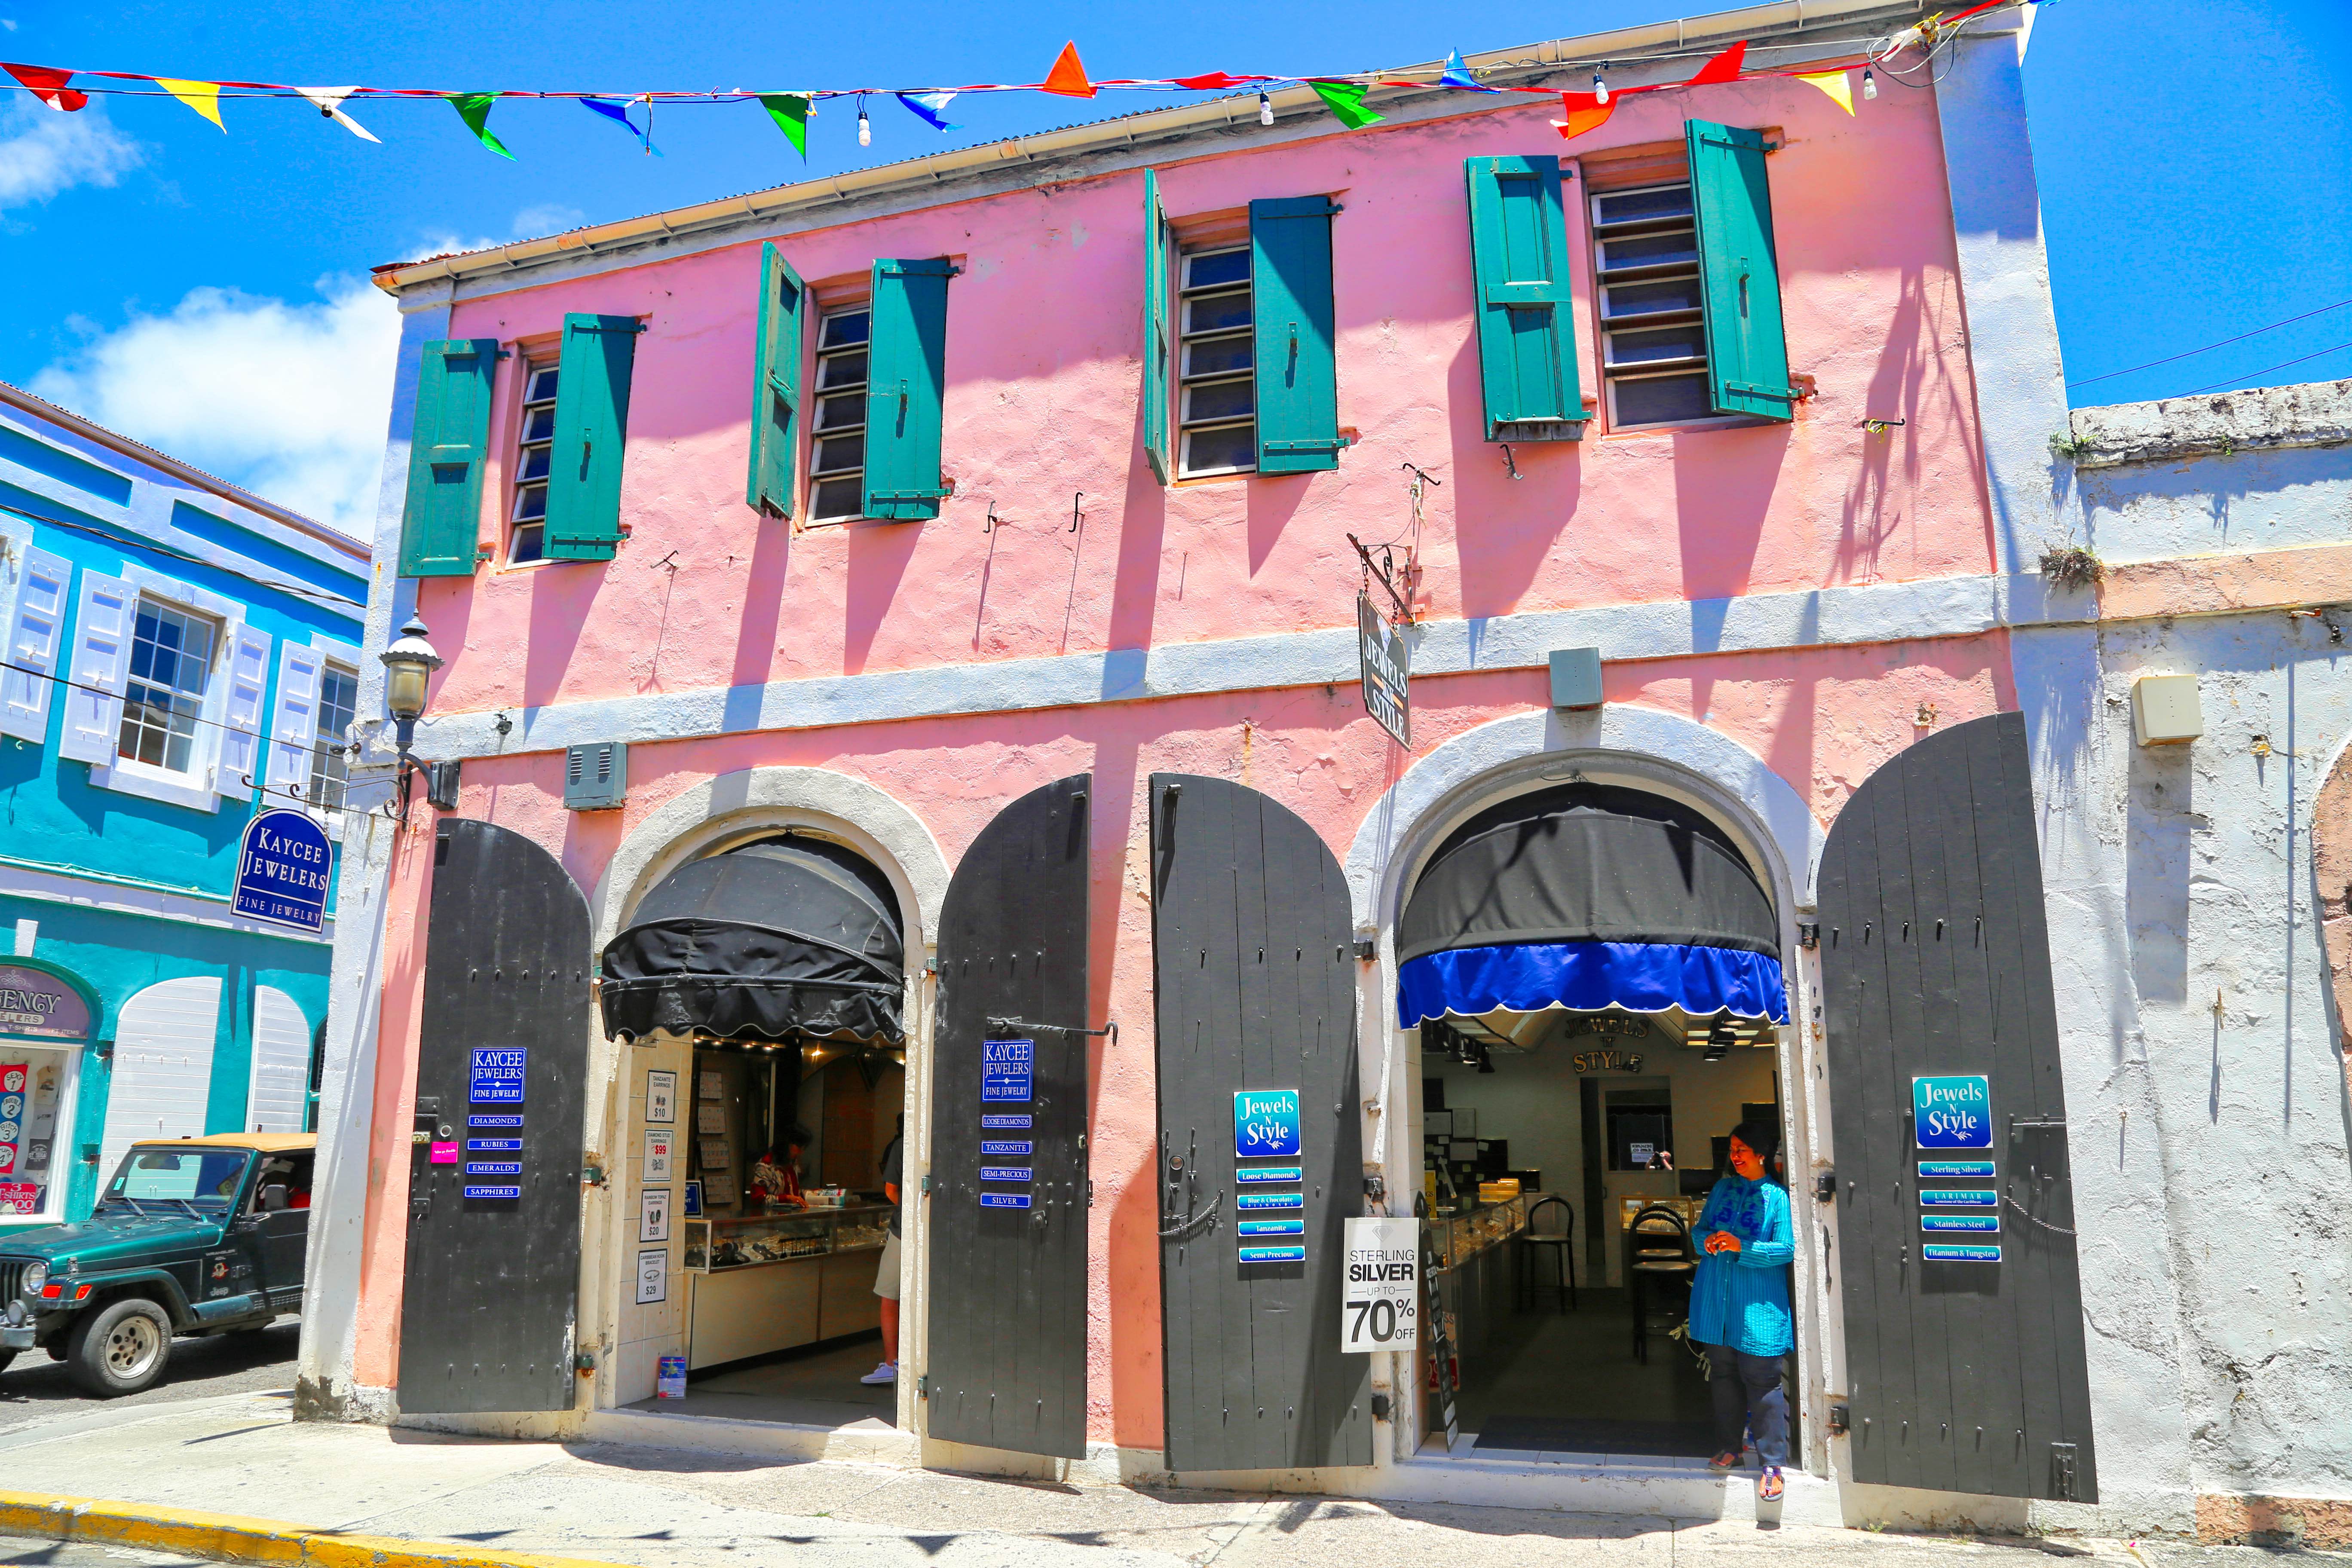 Tourist stops for souvenirs in pink storefront in the historic district of Charlotte Amalie, St. Thomas